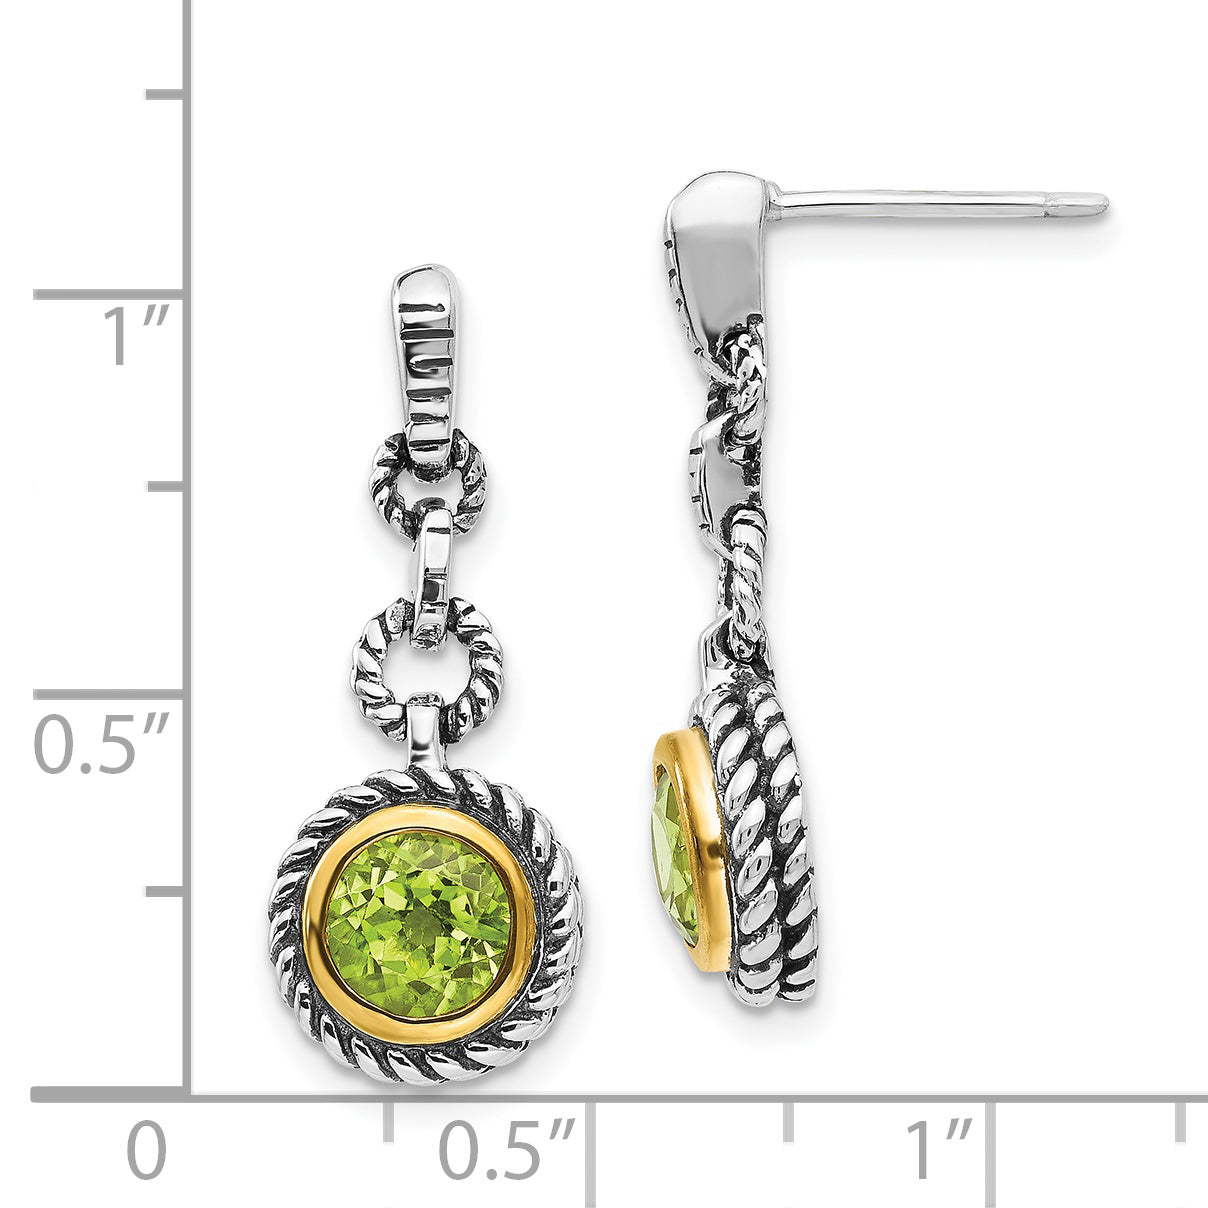 Shey Couture Sterling Silver Gold-tone Flash Gold-plated Antiqued Round Bezel Peridot Post Dangle Earrings